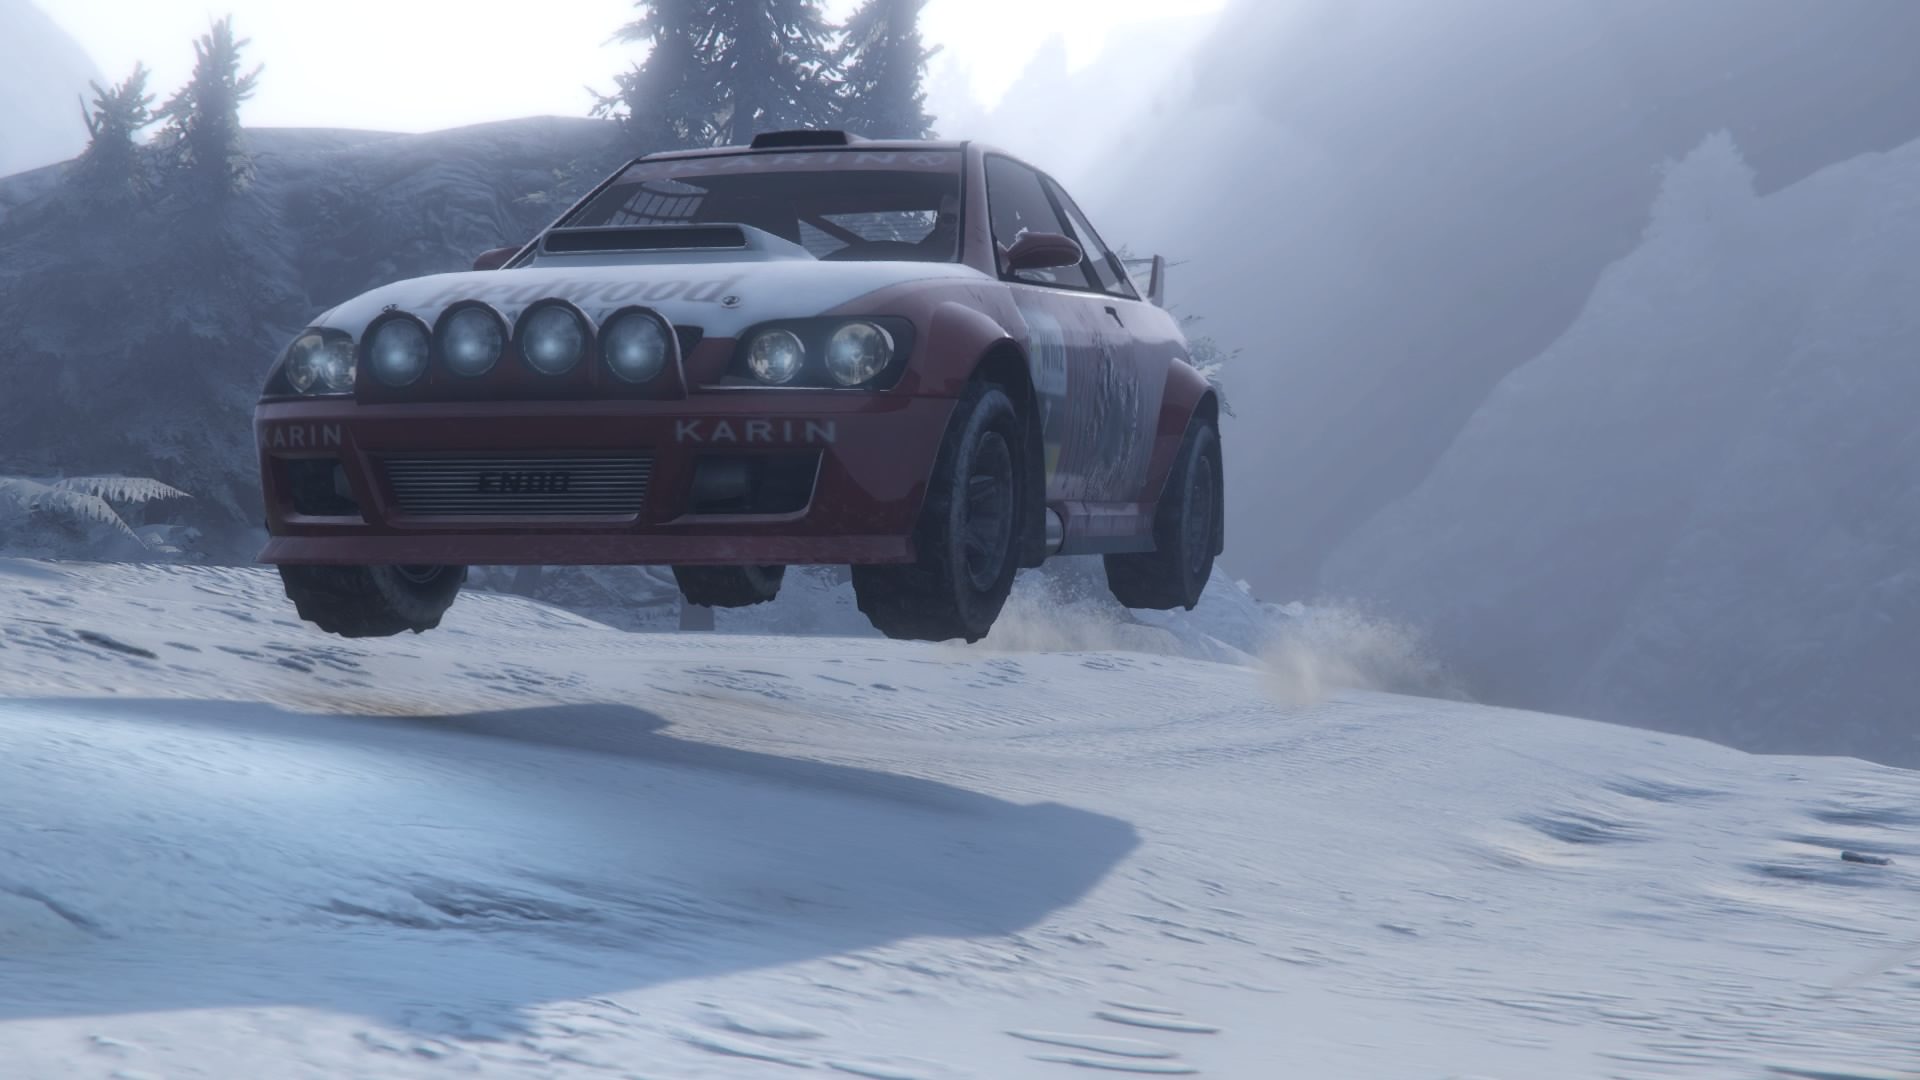 Grand Theft Auto V - Rallying In The Snow - 74